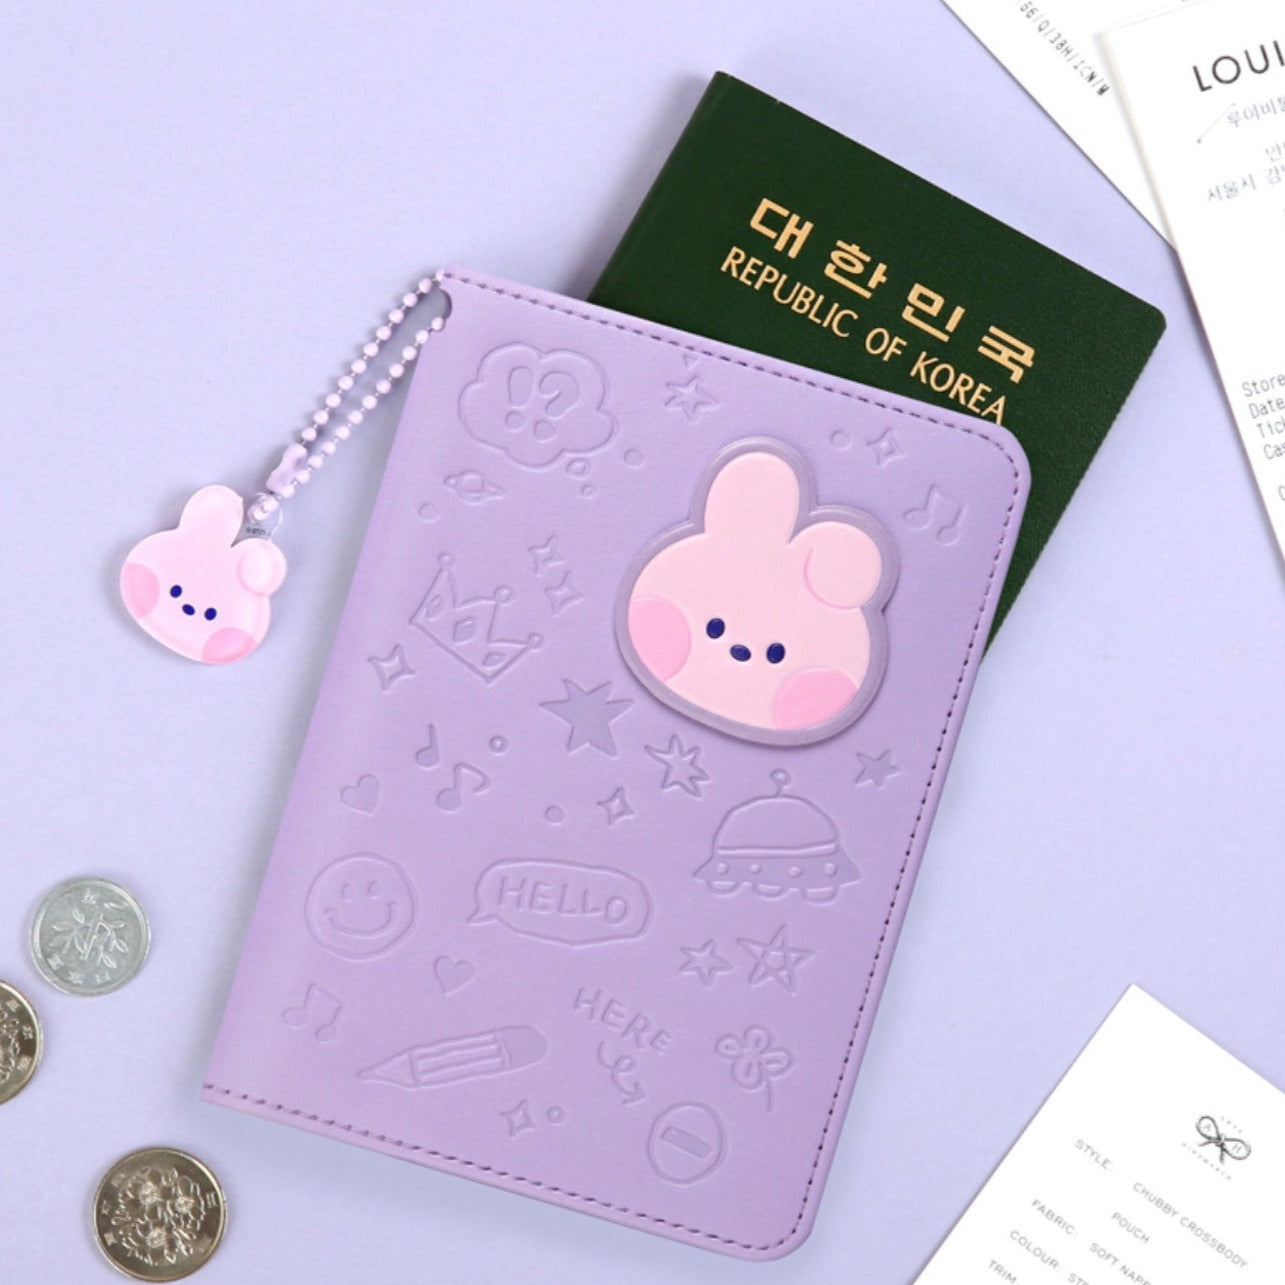 BT21 Minini Mang Leather Patch Passport Holder Cover